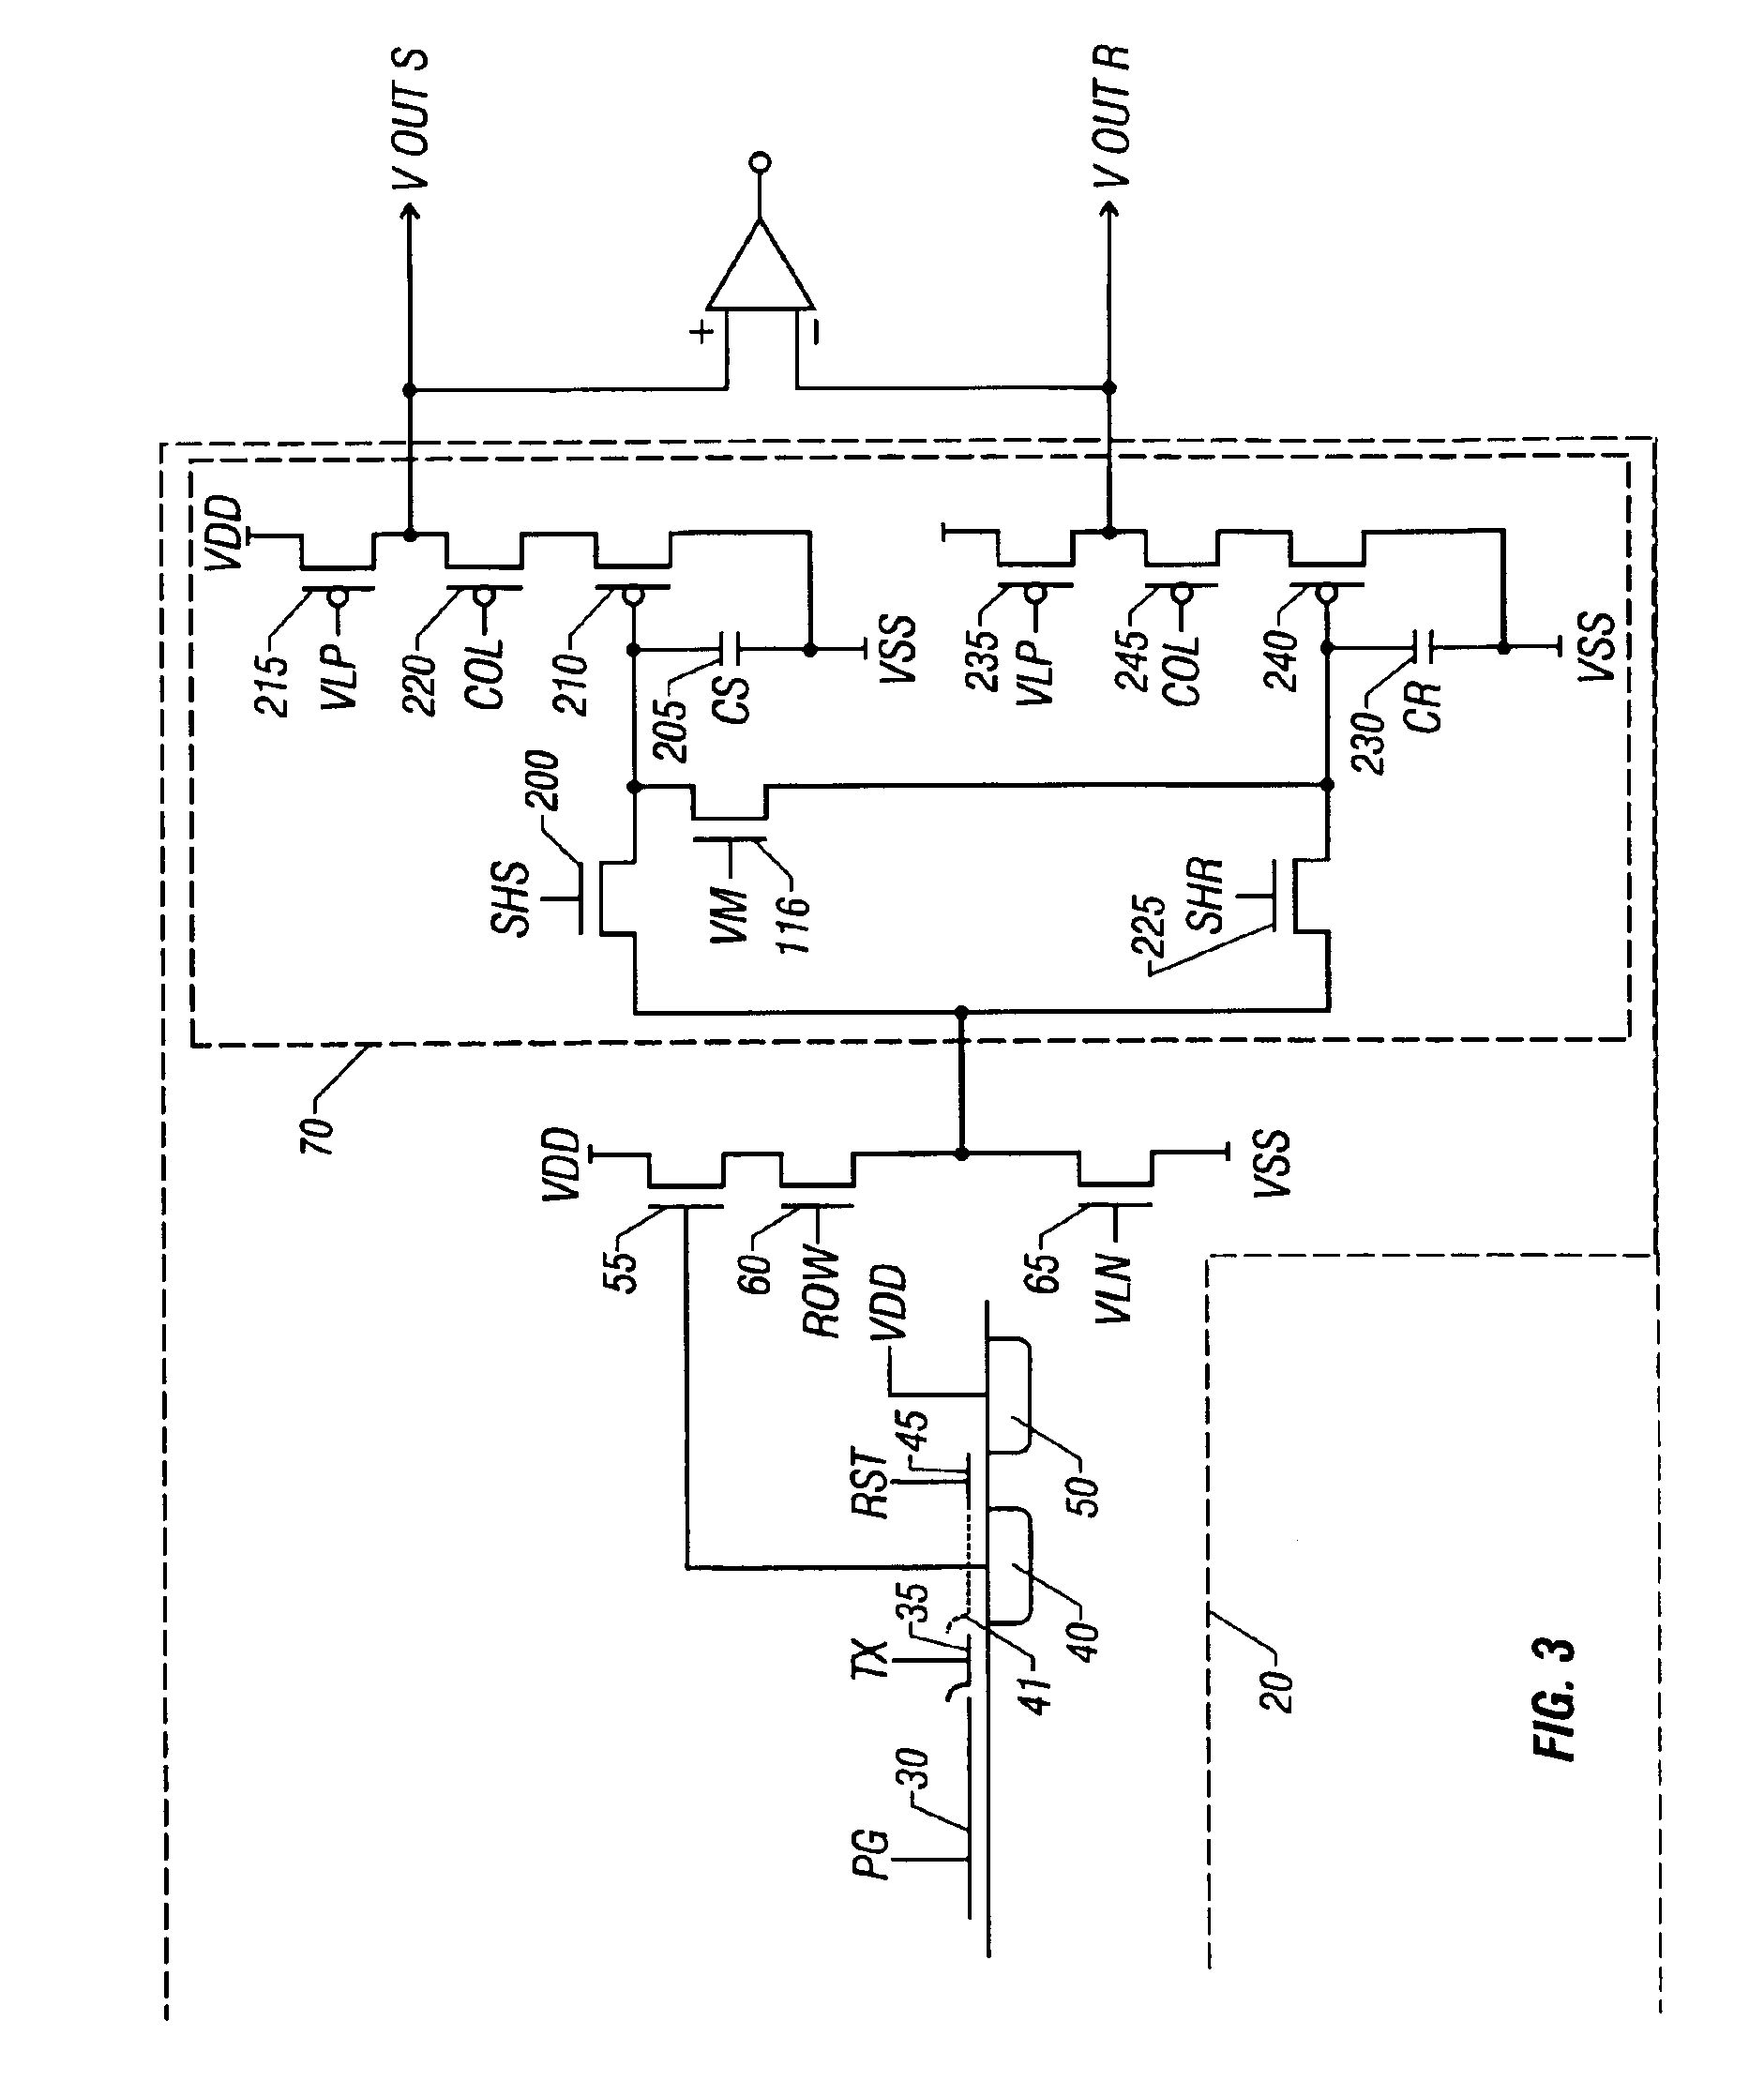 Method of acquiring an image from an optical structure having pixels with dedicated readout circuits